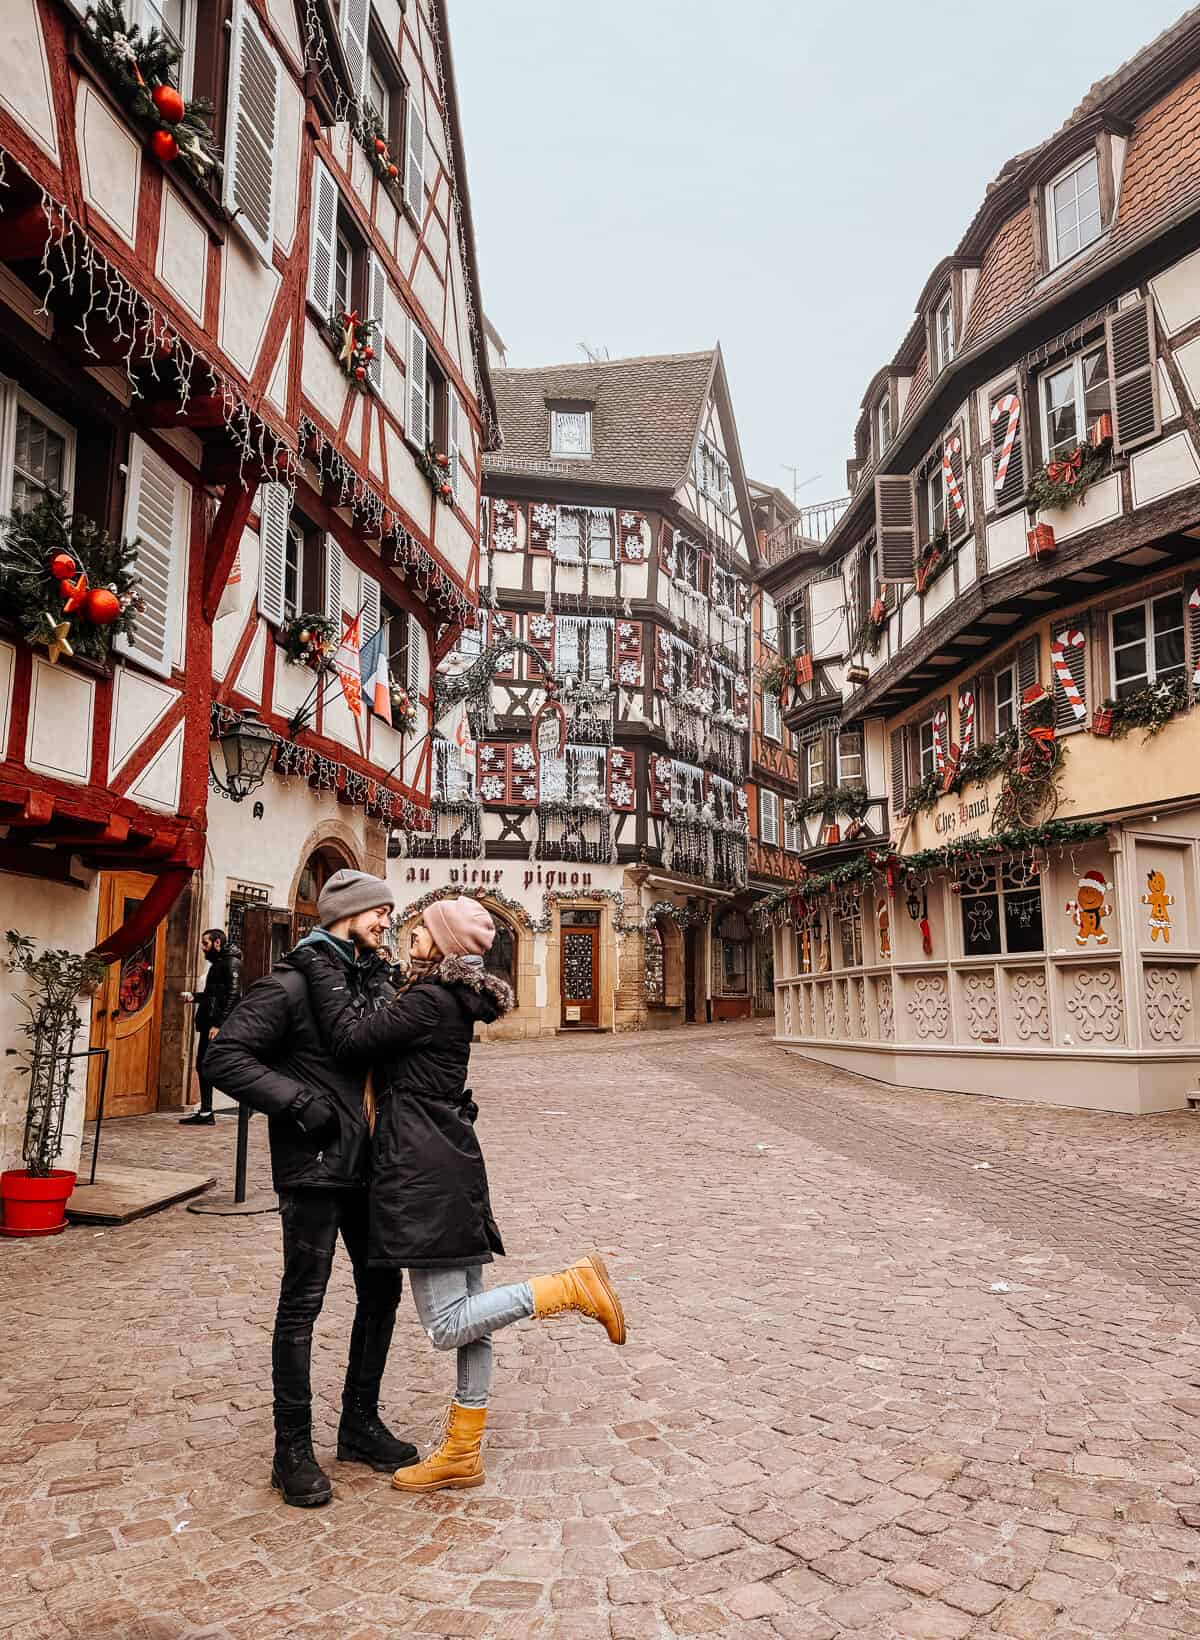 A couple embraces while posing in front of traditional half-timbered houses decorated with Christmas ornaments in Colmar's old town, a woman lifts one leg in excitement.